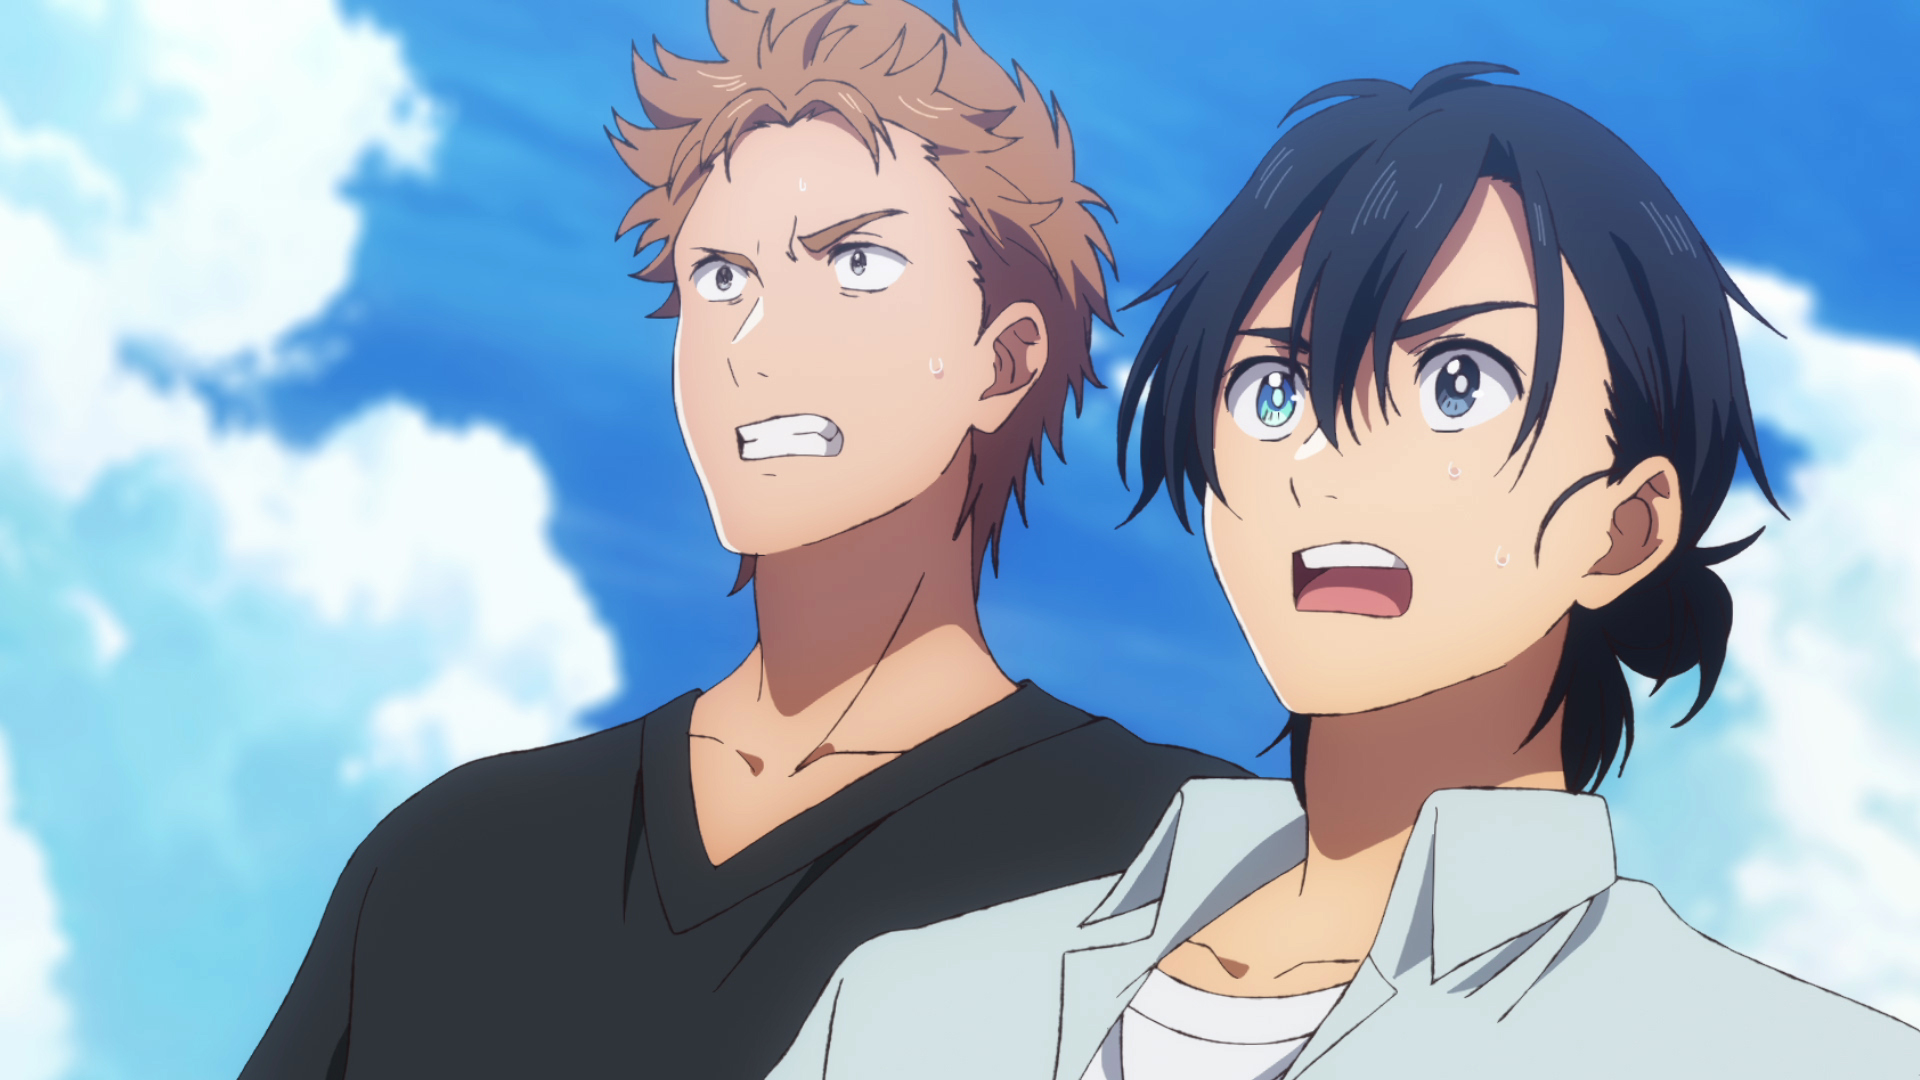 Summer Time Rendering Reveals Episode 9 Preview - Anime Corner